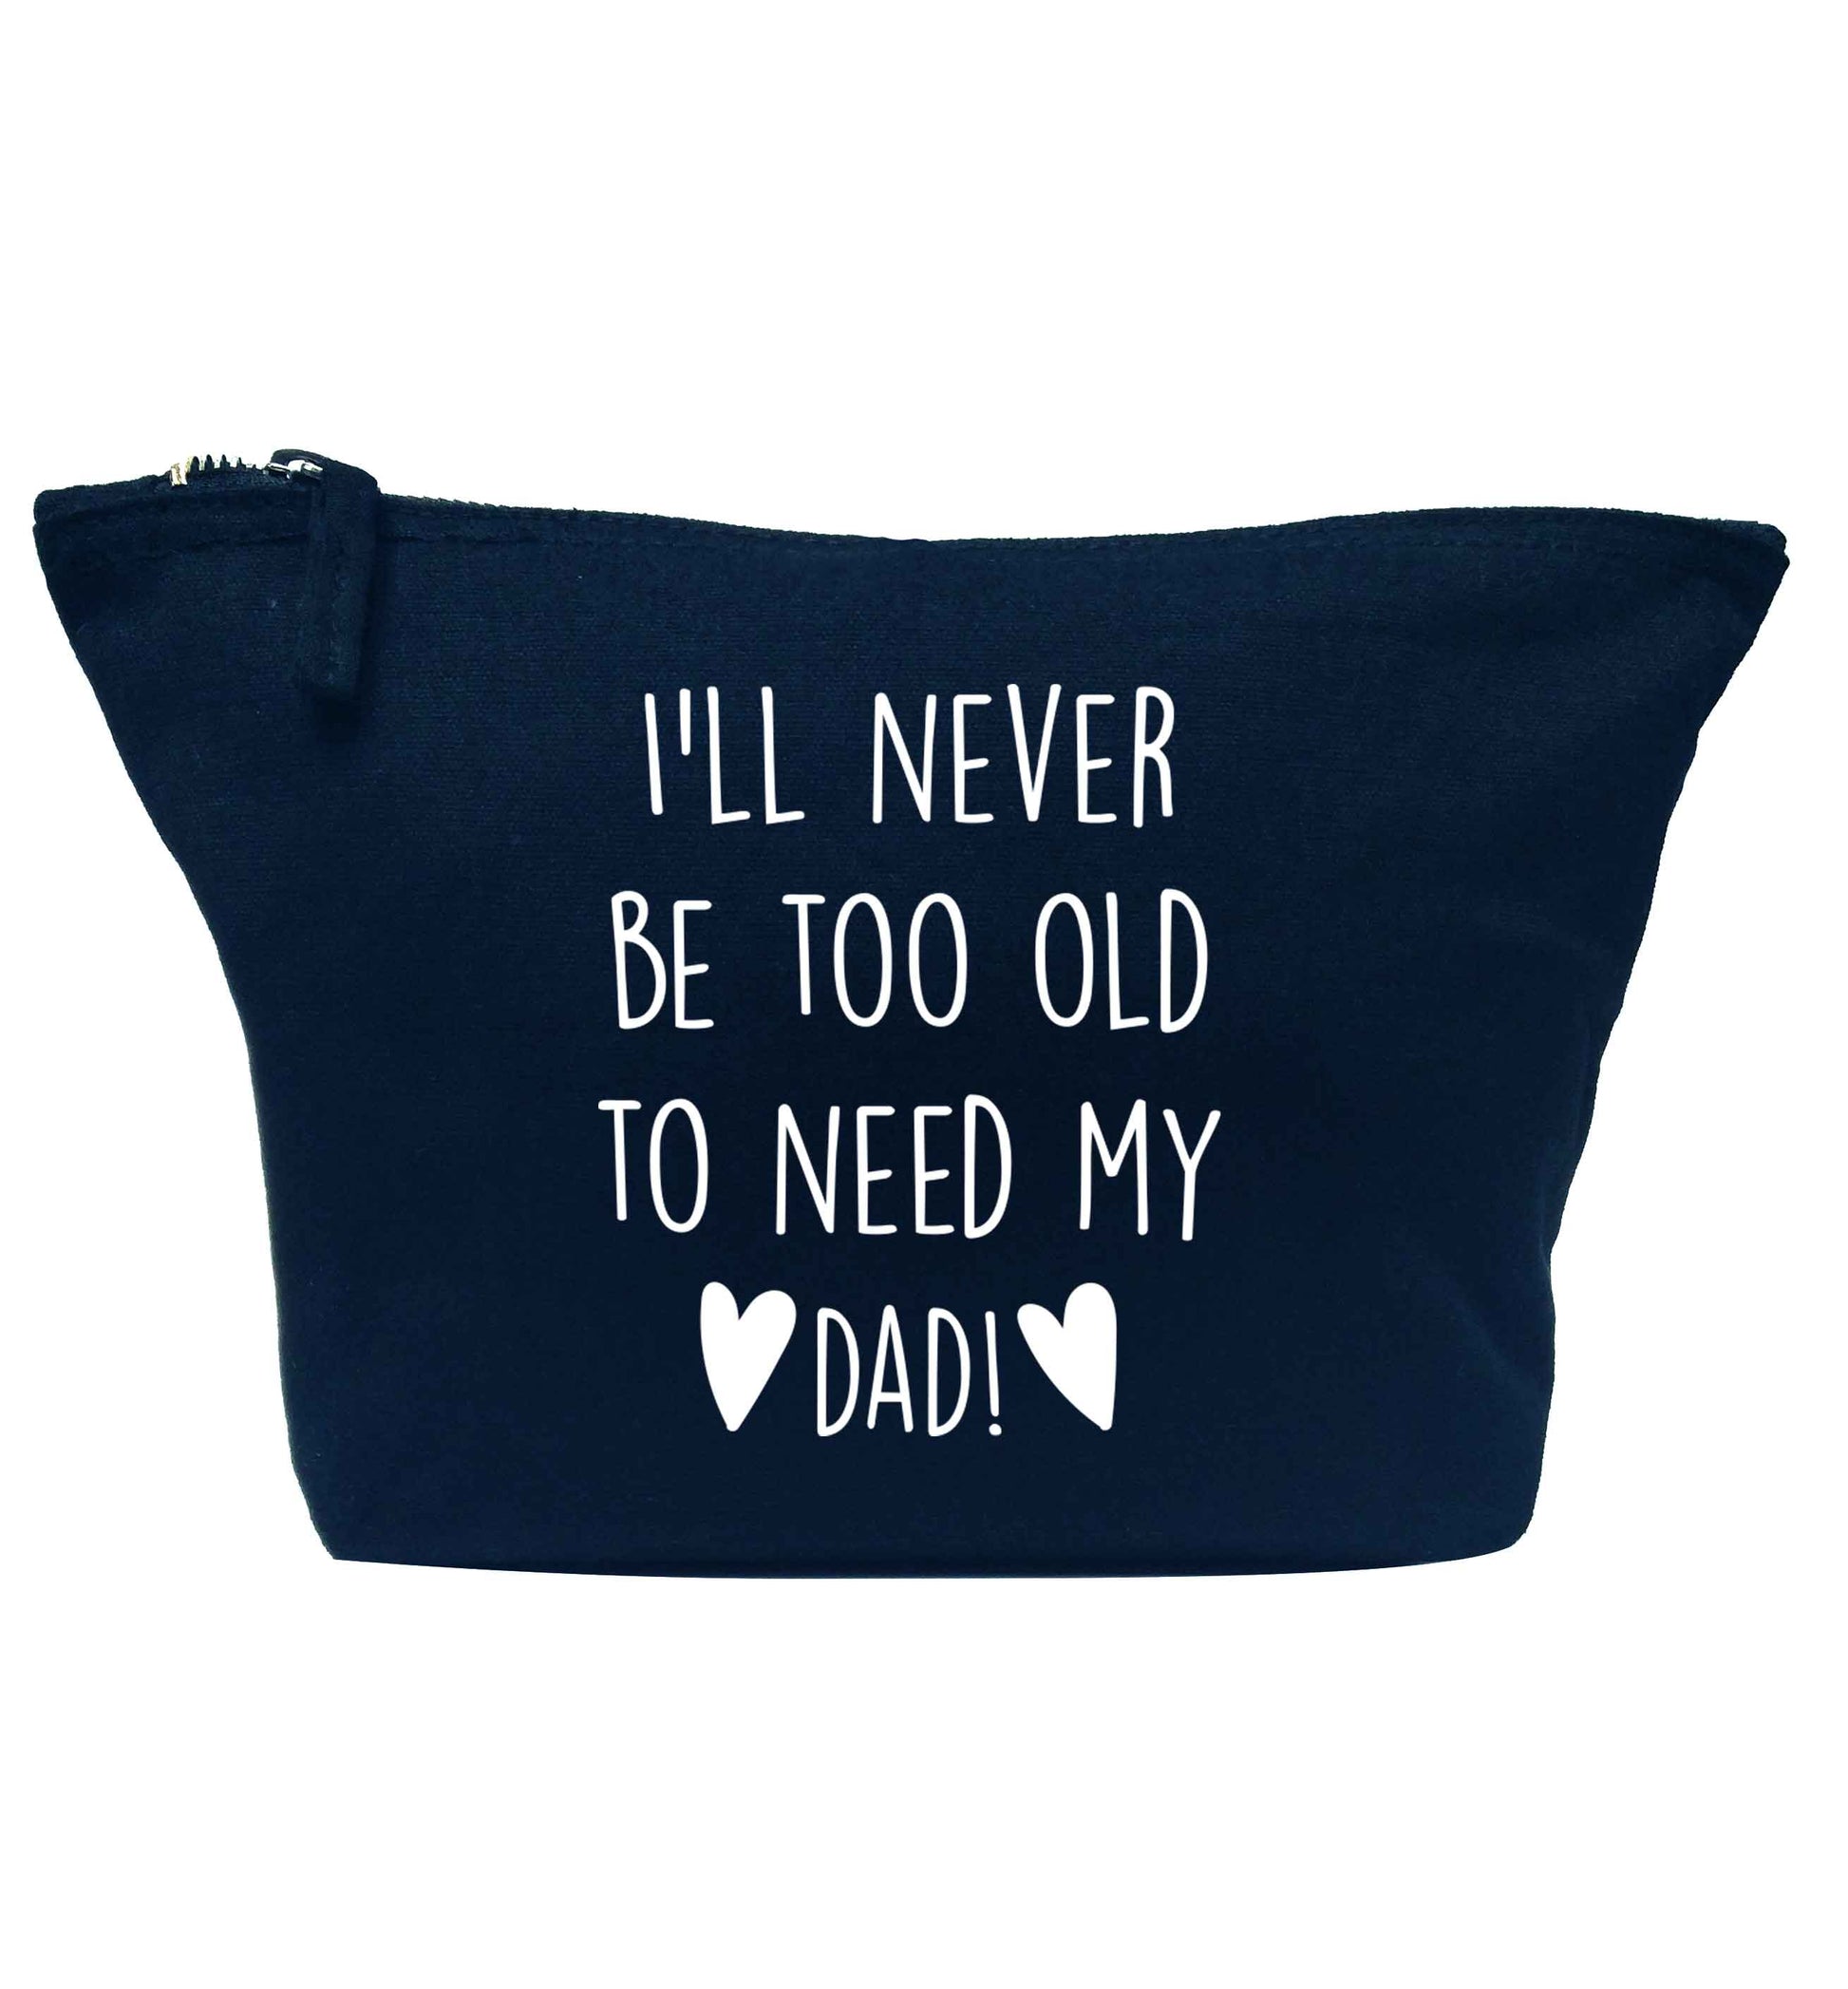 I'll never be too old to need my dad navy makeup bag